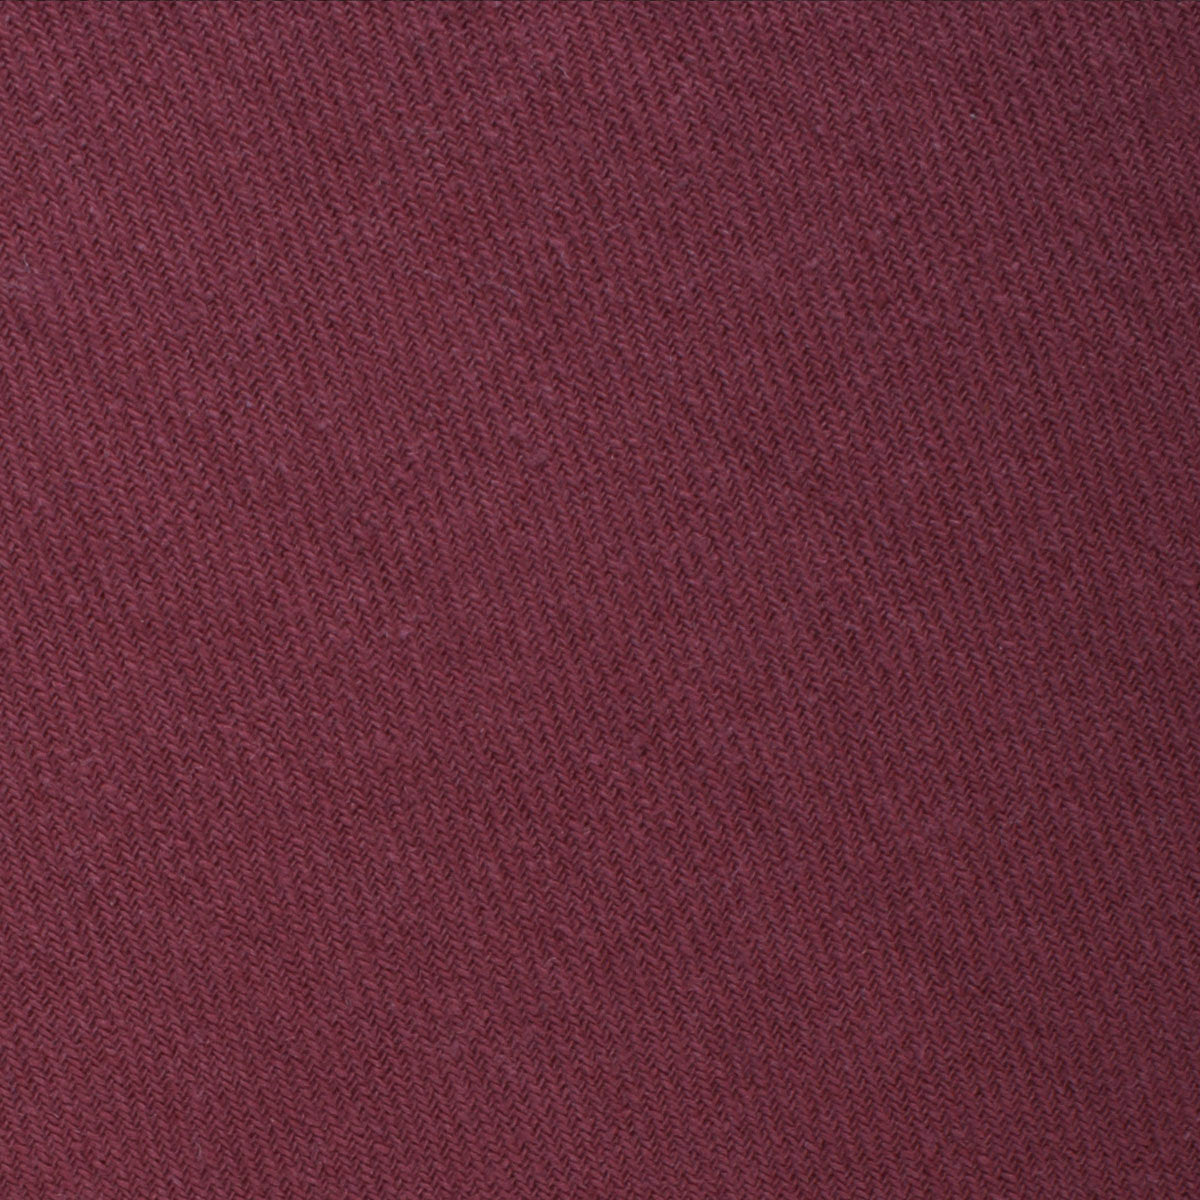 Mulberry Linen Pocket Square Fabric